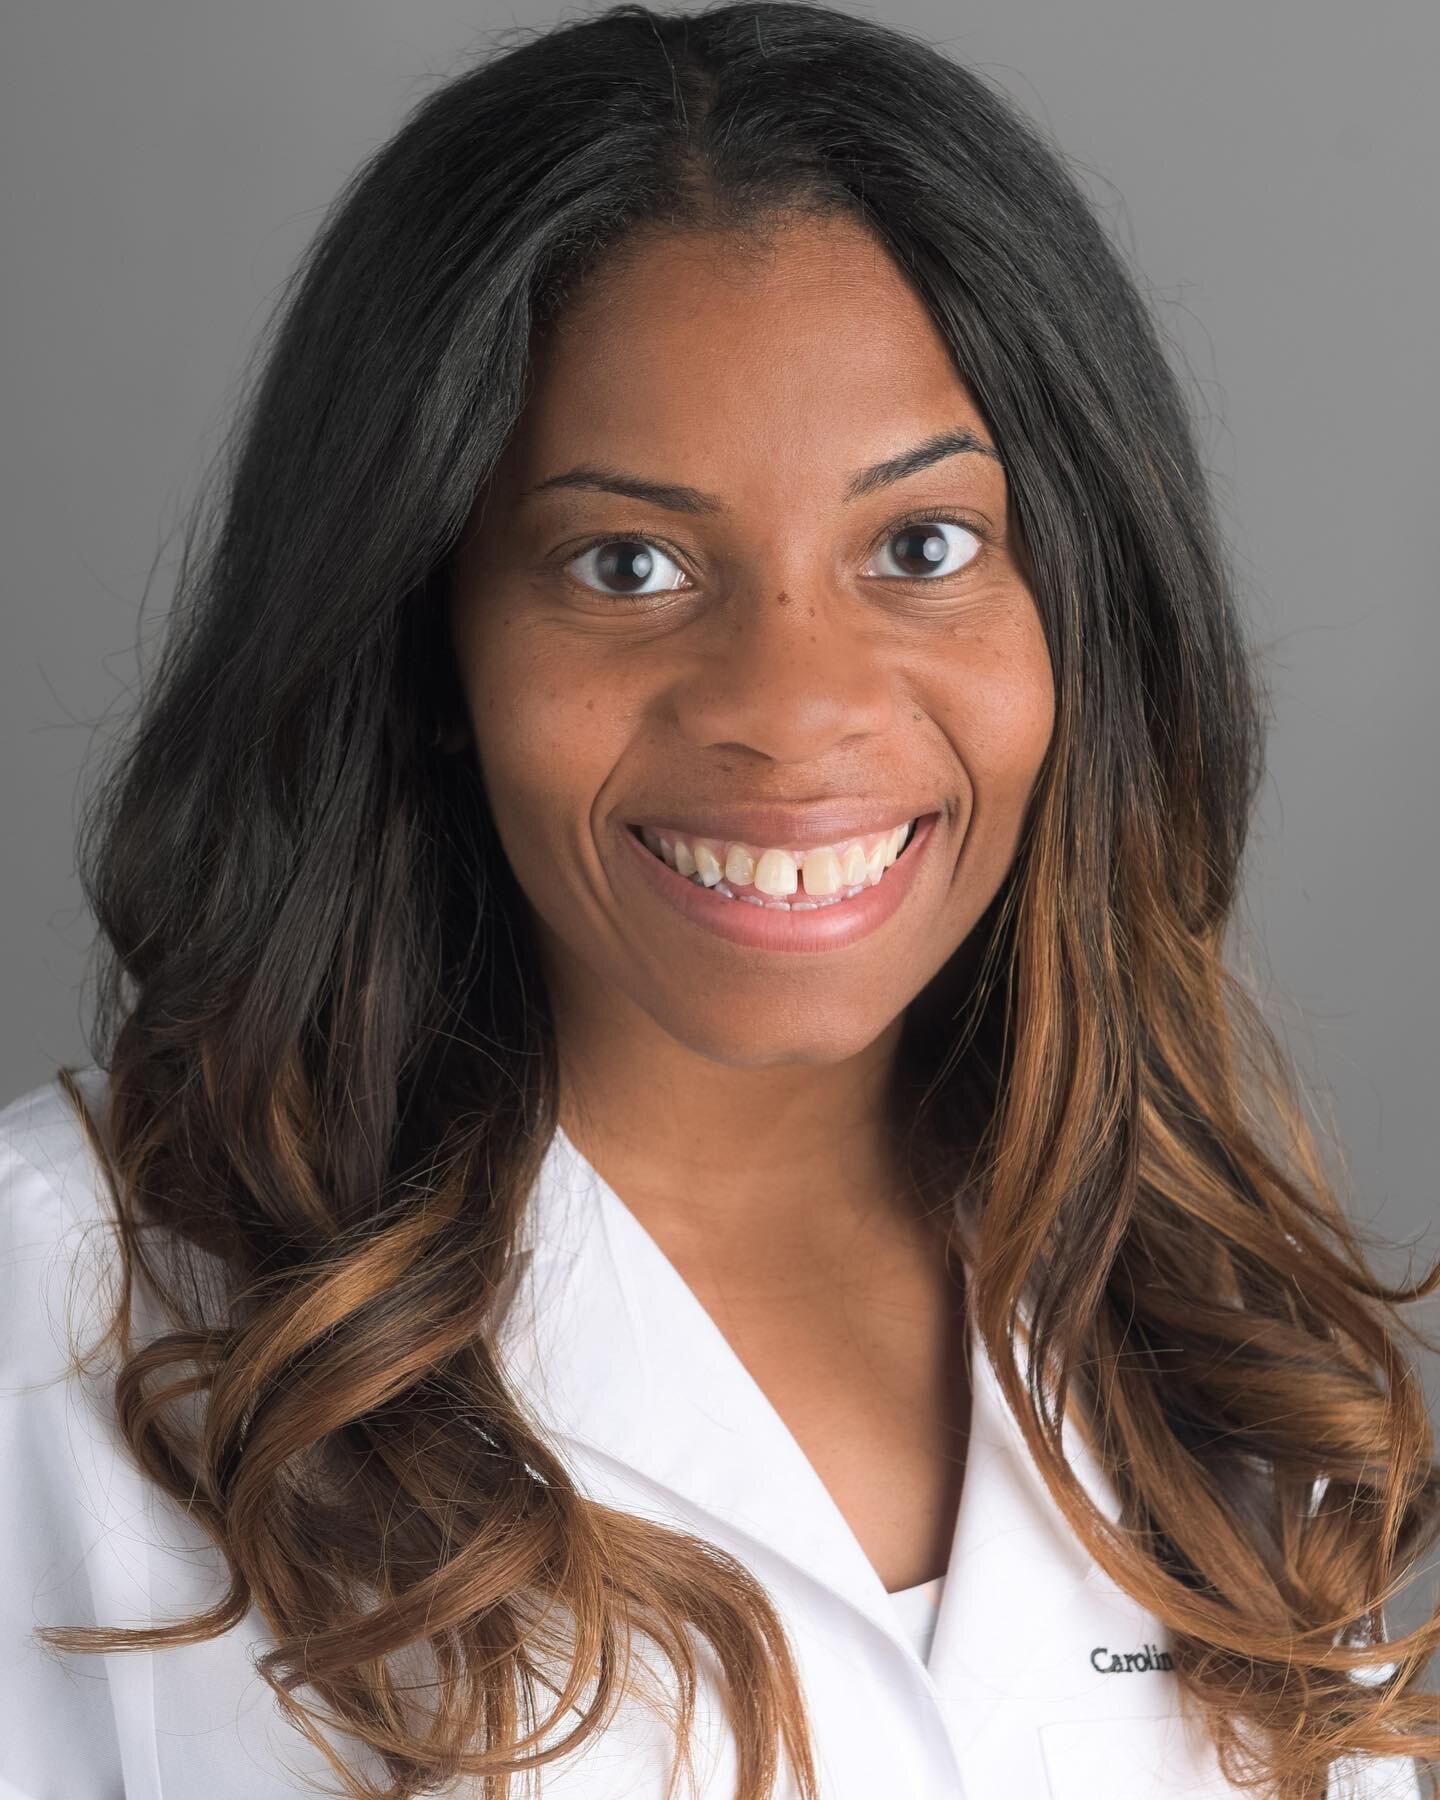 Next up for our #meettheboardmembers spotlight is our Vice-President, Charmeen Wilkes! 

Hi MAPA members! My name is Charmeen. I&rsquo;m also a rare Charlotte native. After a career as an Athletic Trainer, I became interested in the PA profession and